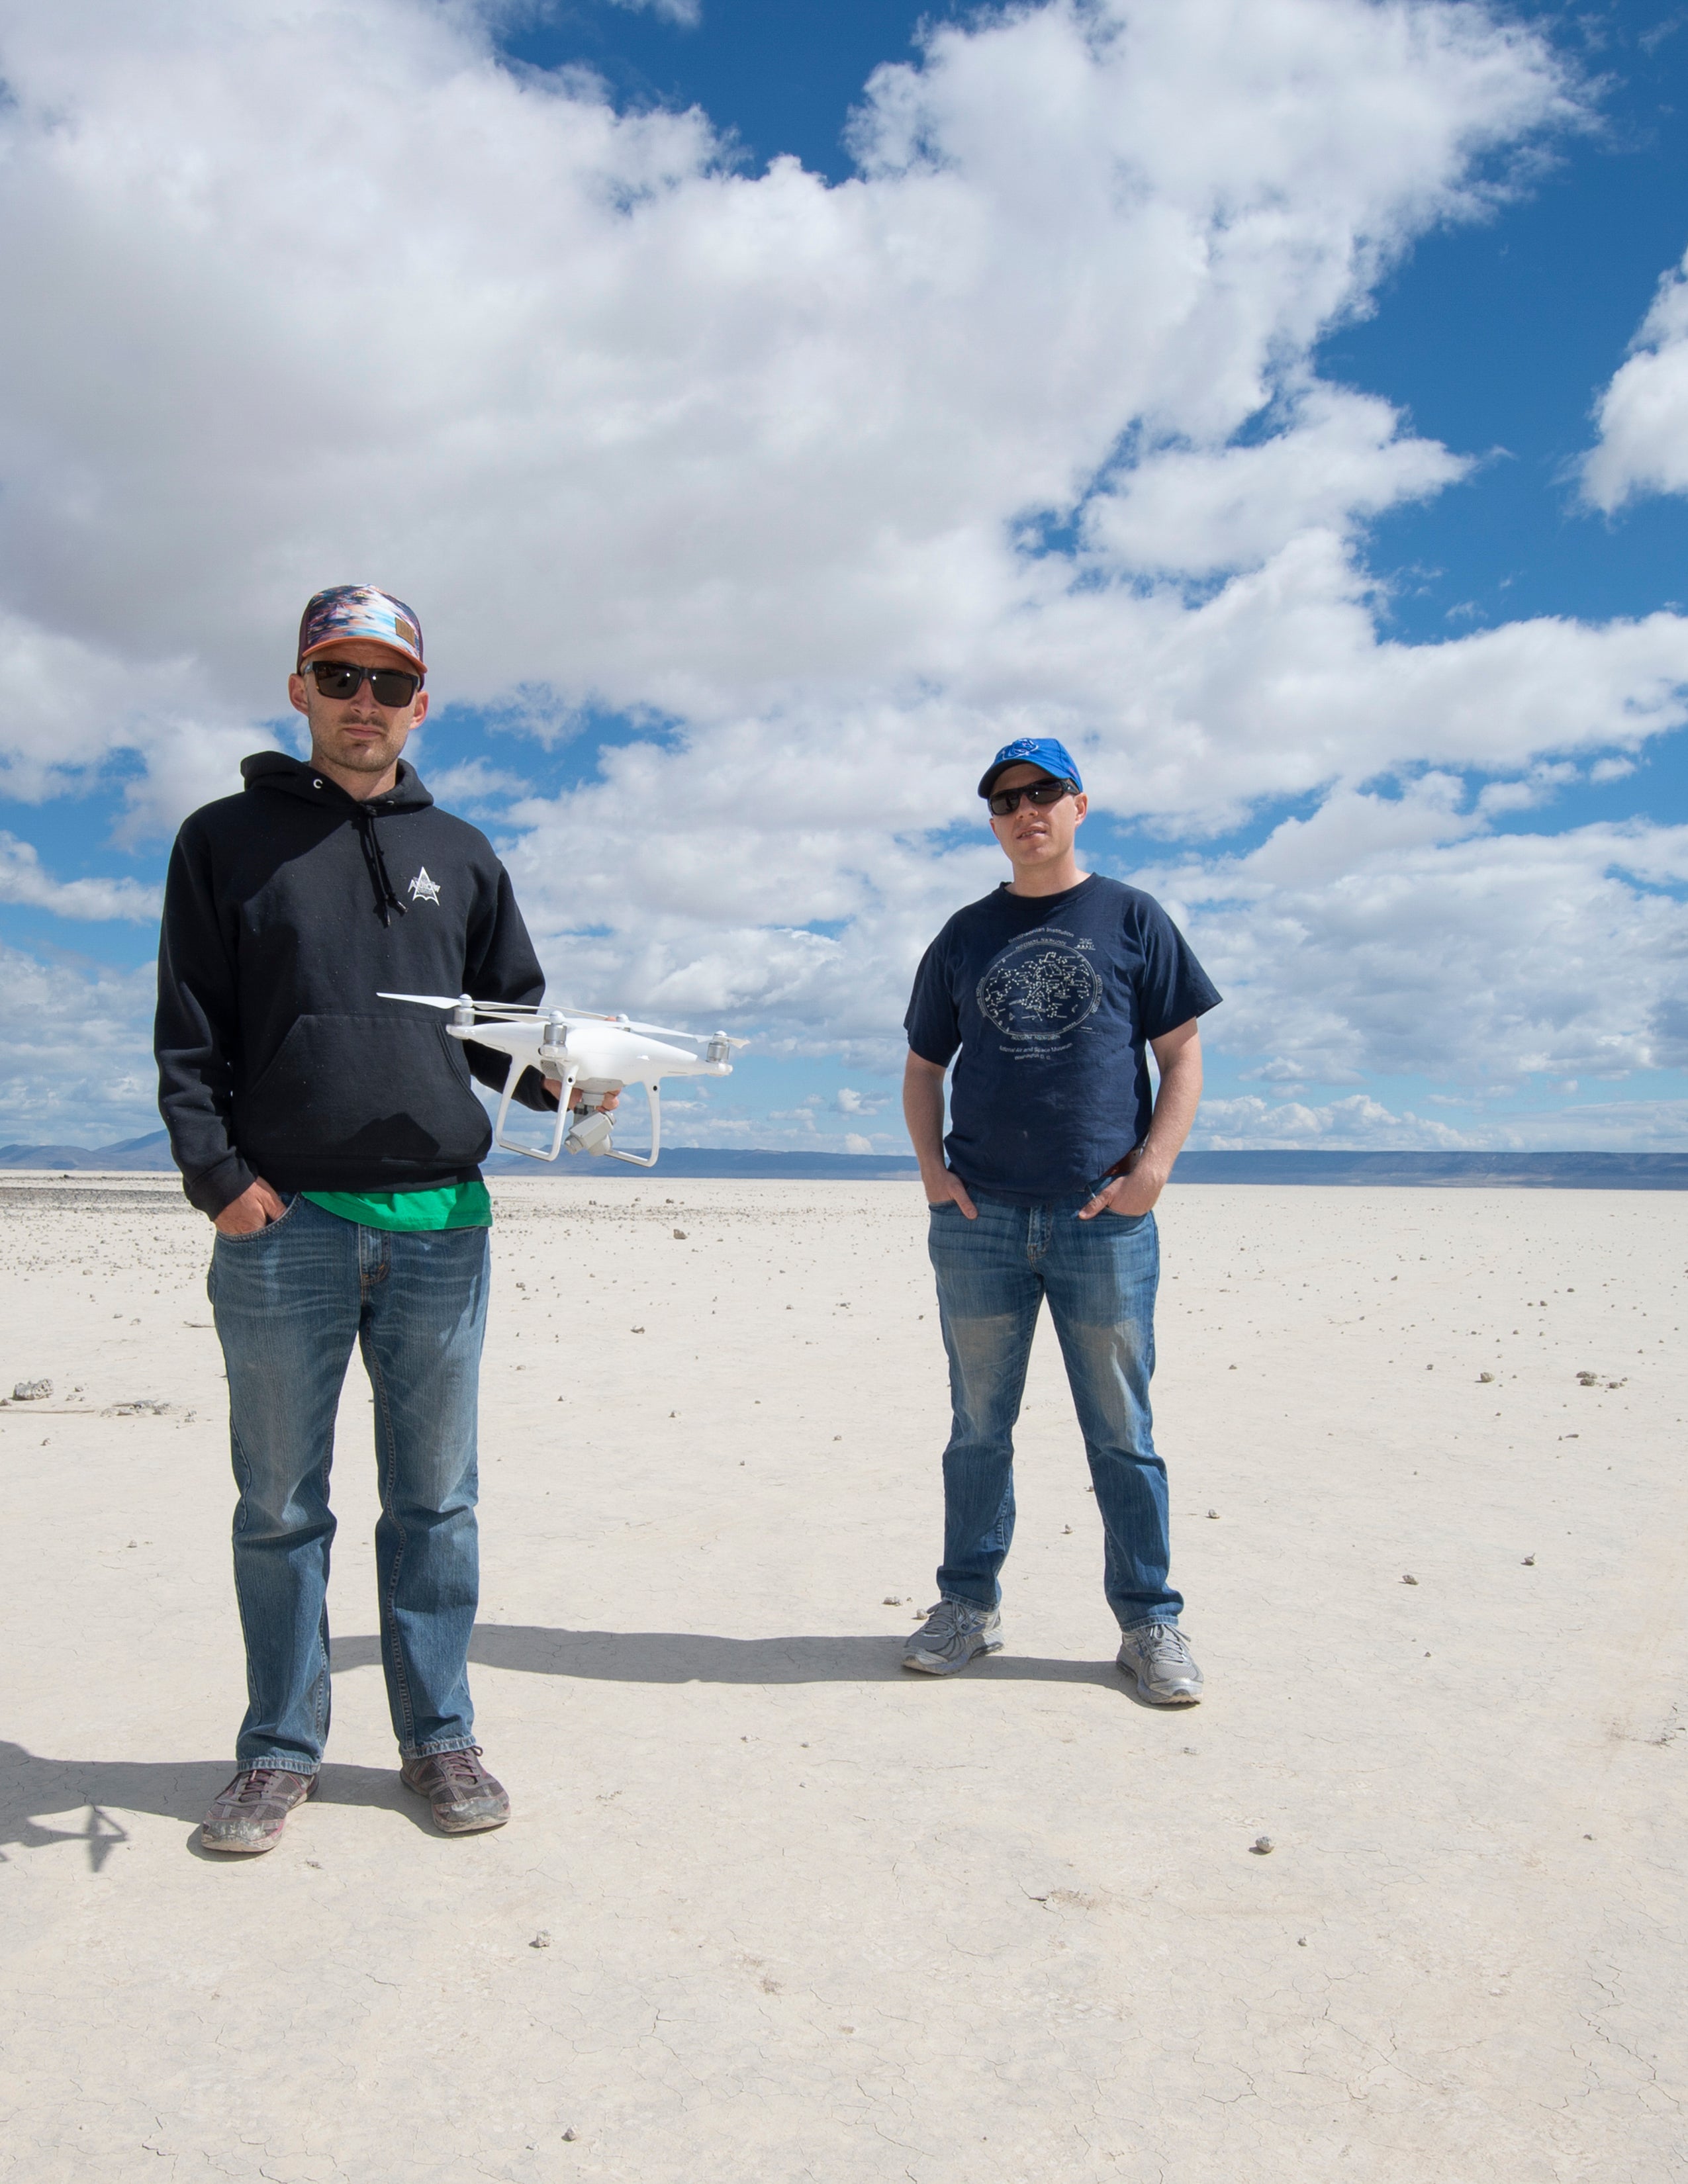 Researchers standing in Oregon desert with drone